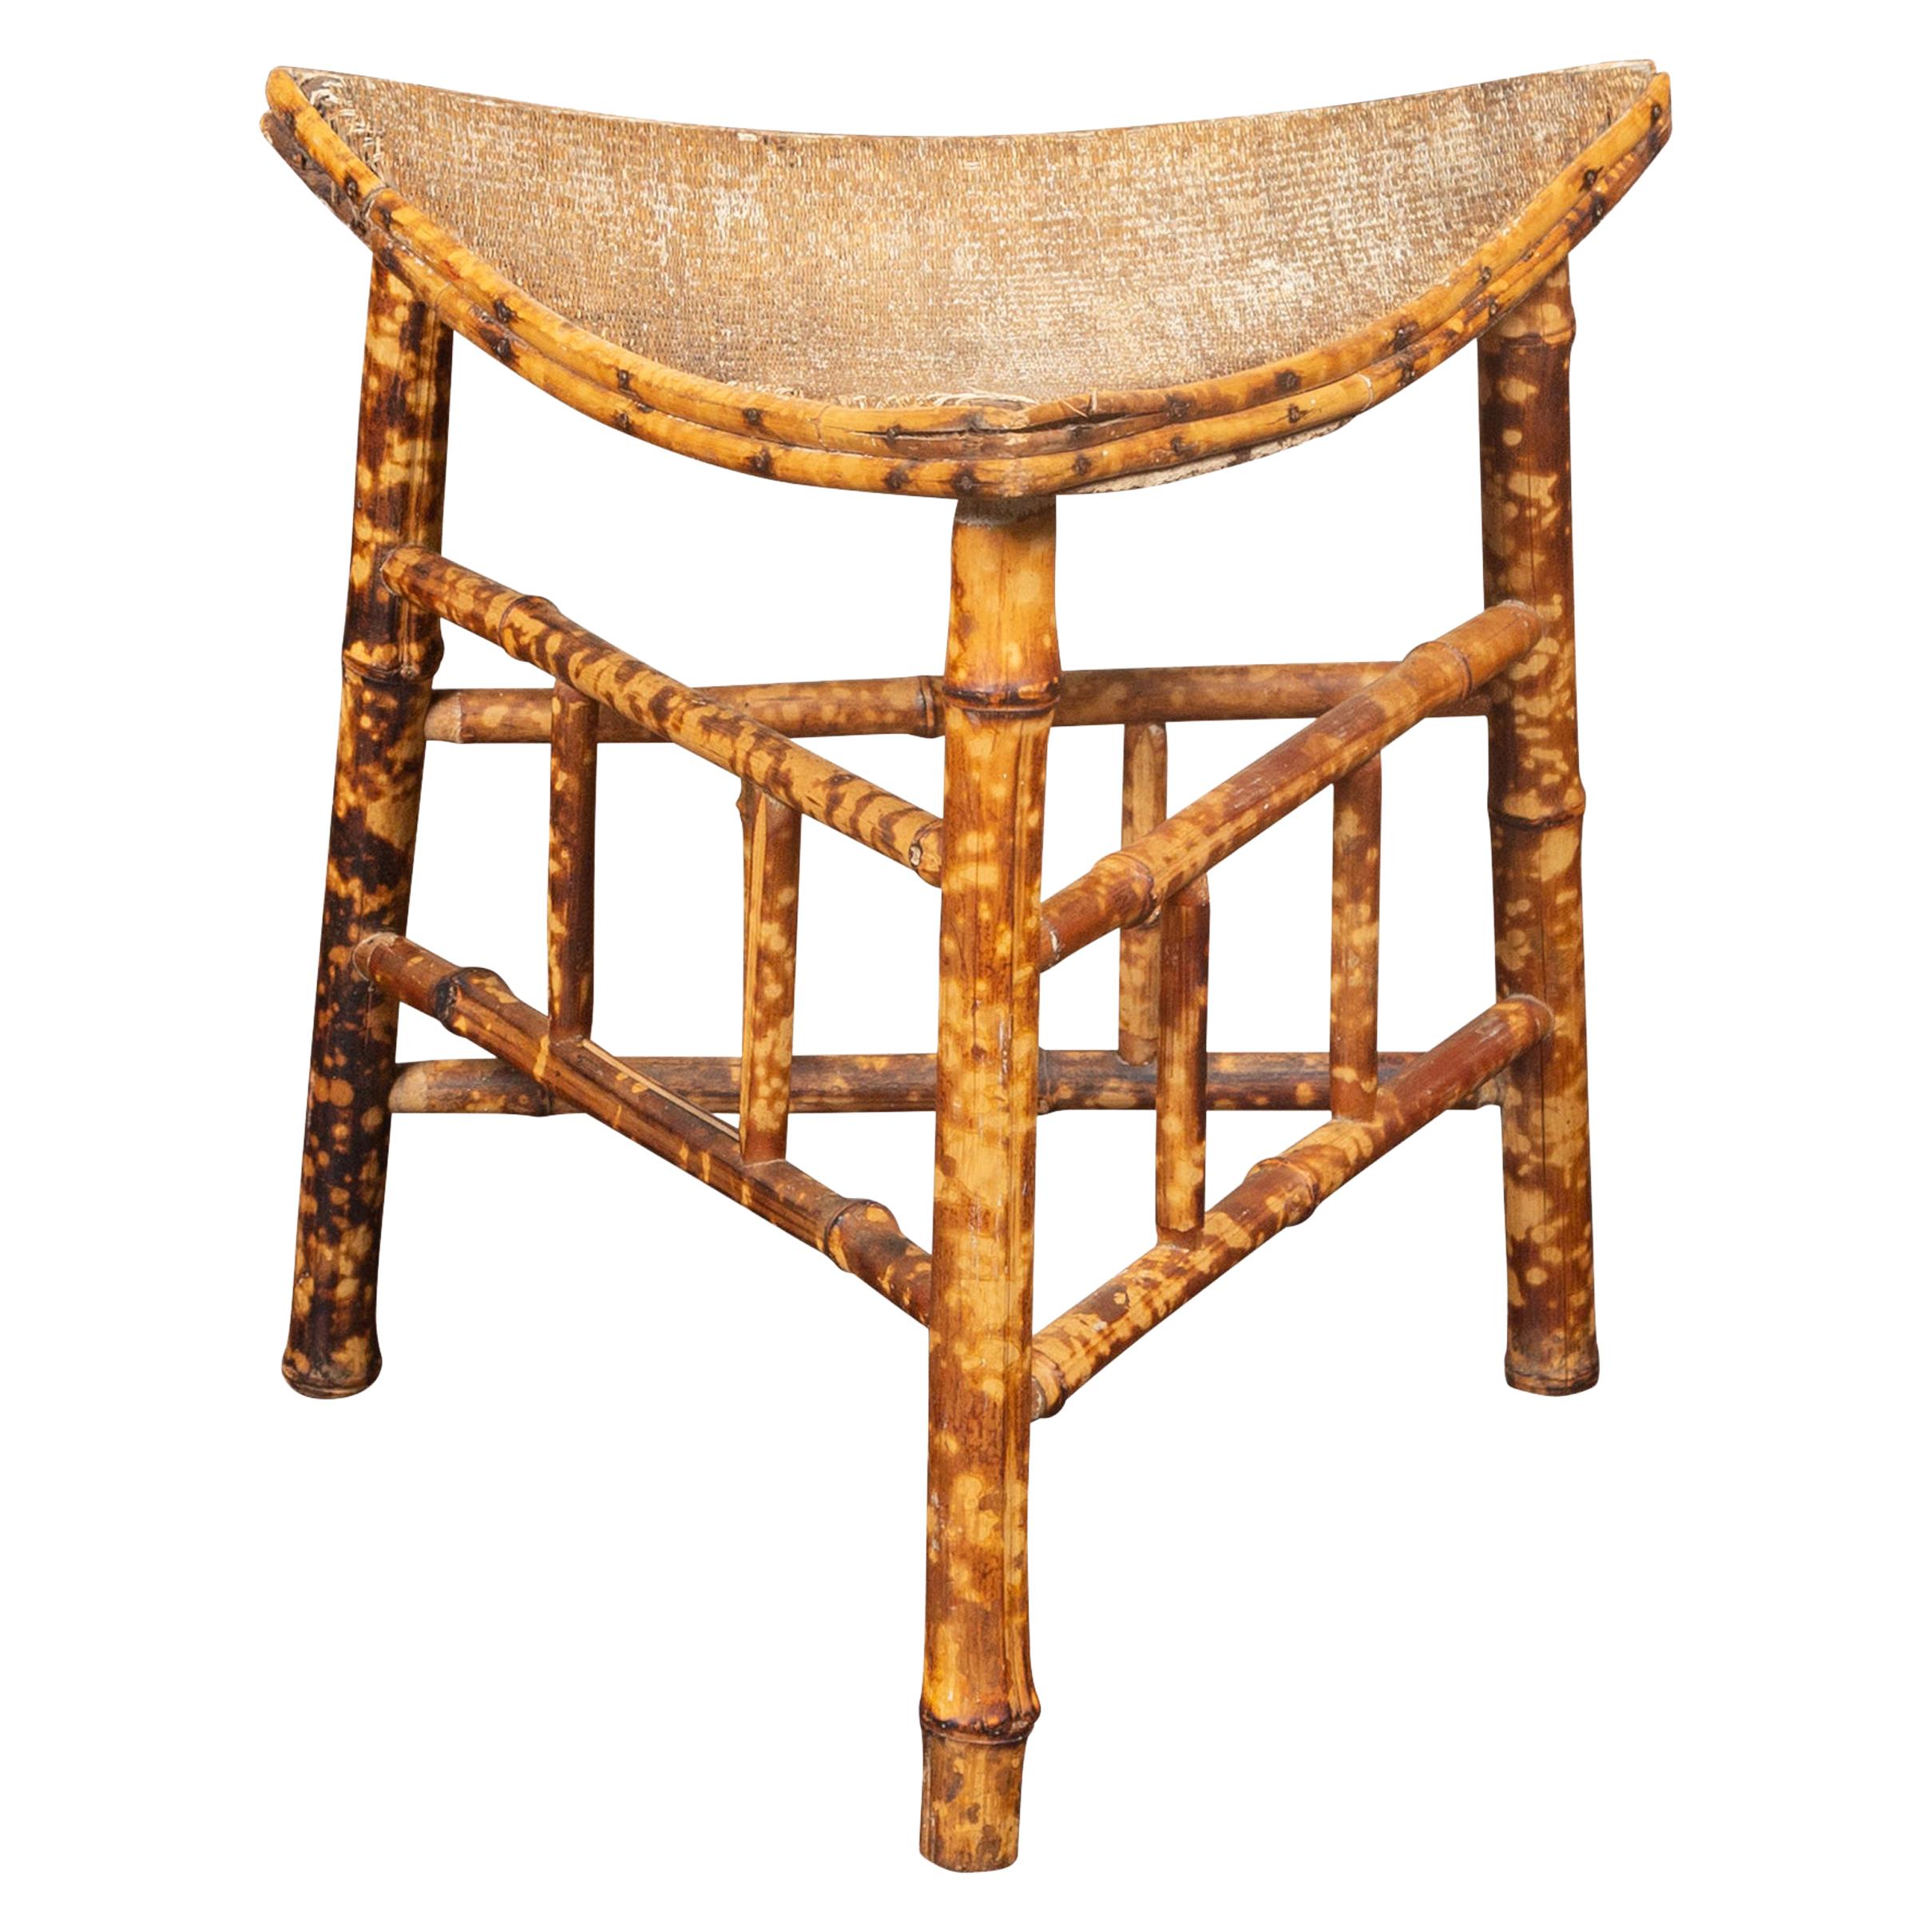 French 1930s Egyptian Revival Faux Bamboo Thebes Stool with Curving Rattan Seat